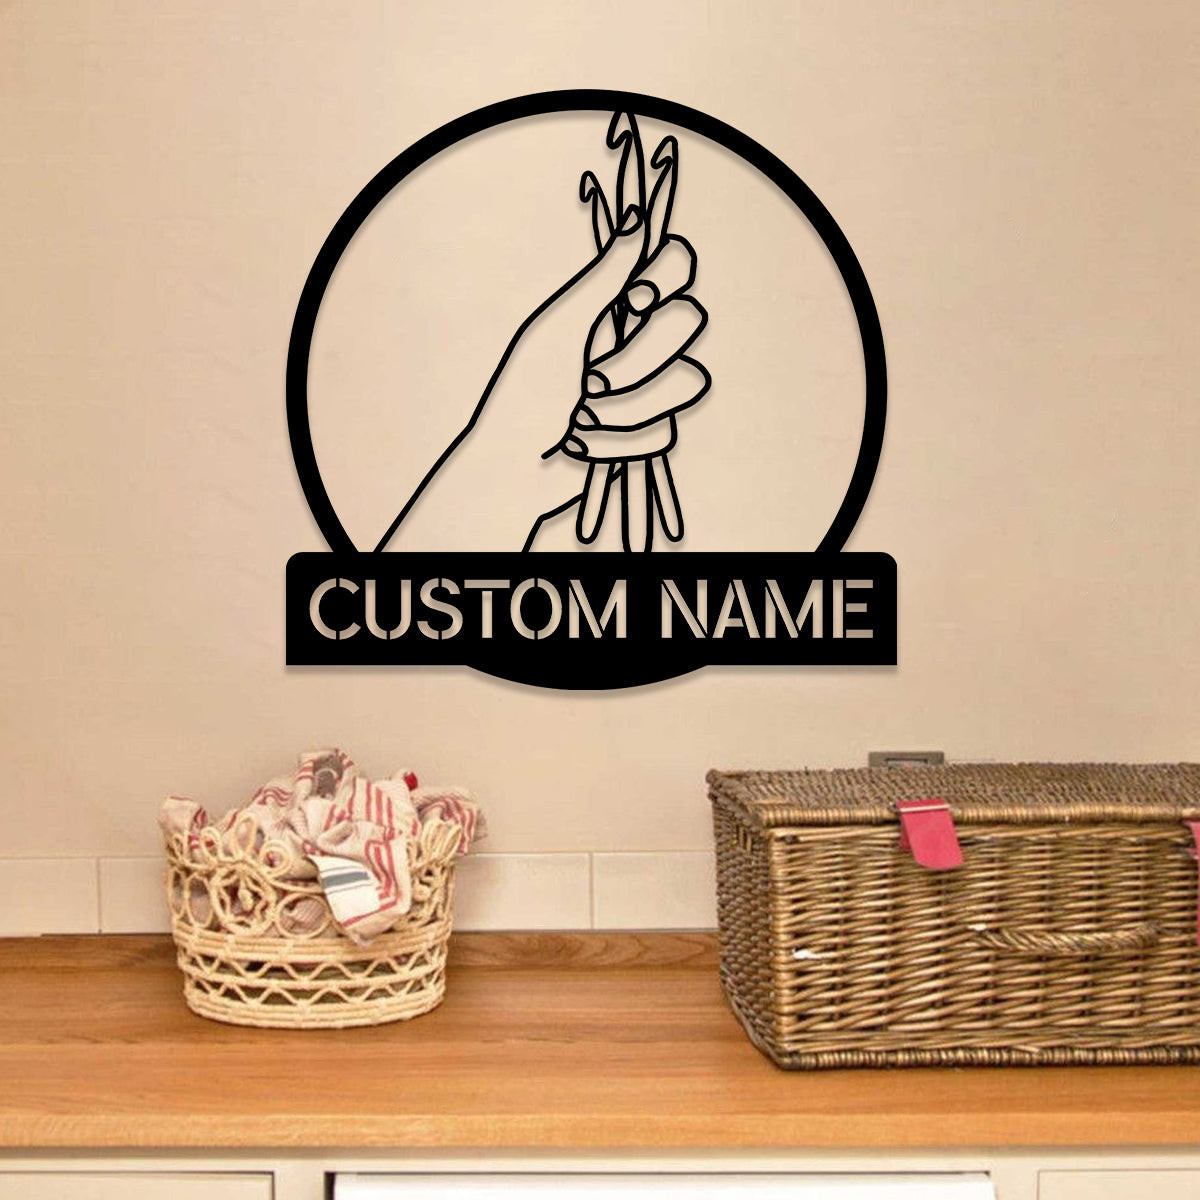 Personalized Crochet Knitting Metal Sign, Wedding, Anniversary Gift For Her, Mother, Grandma, Metal Laser Cut Metal Signs Custom Gift Ideas 14x14IN